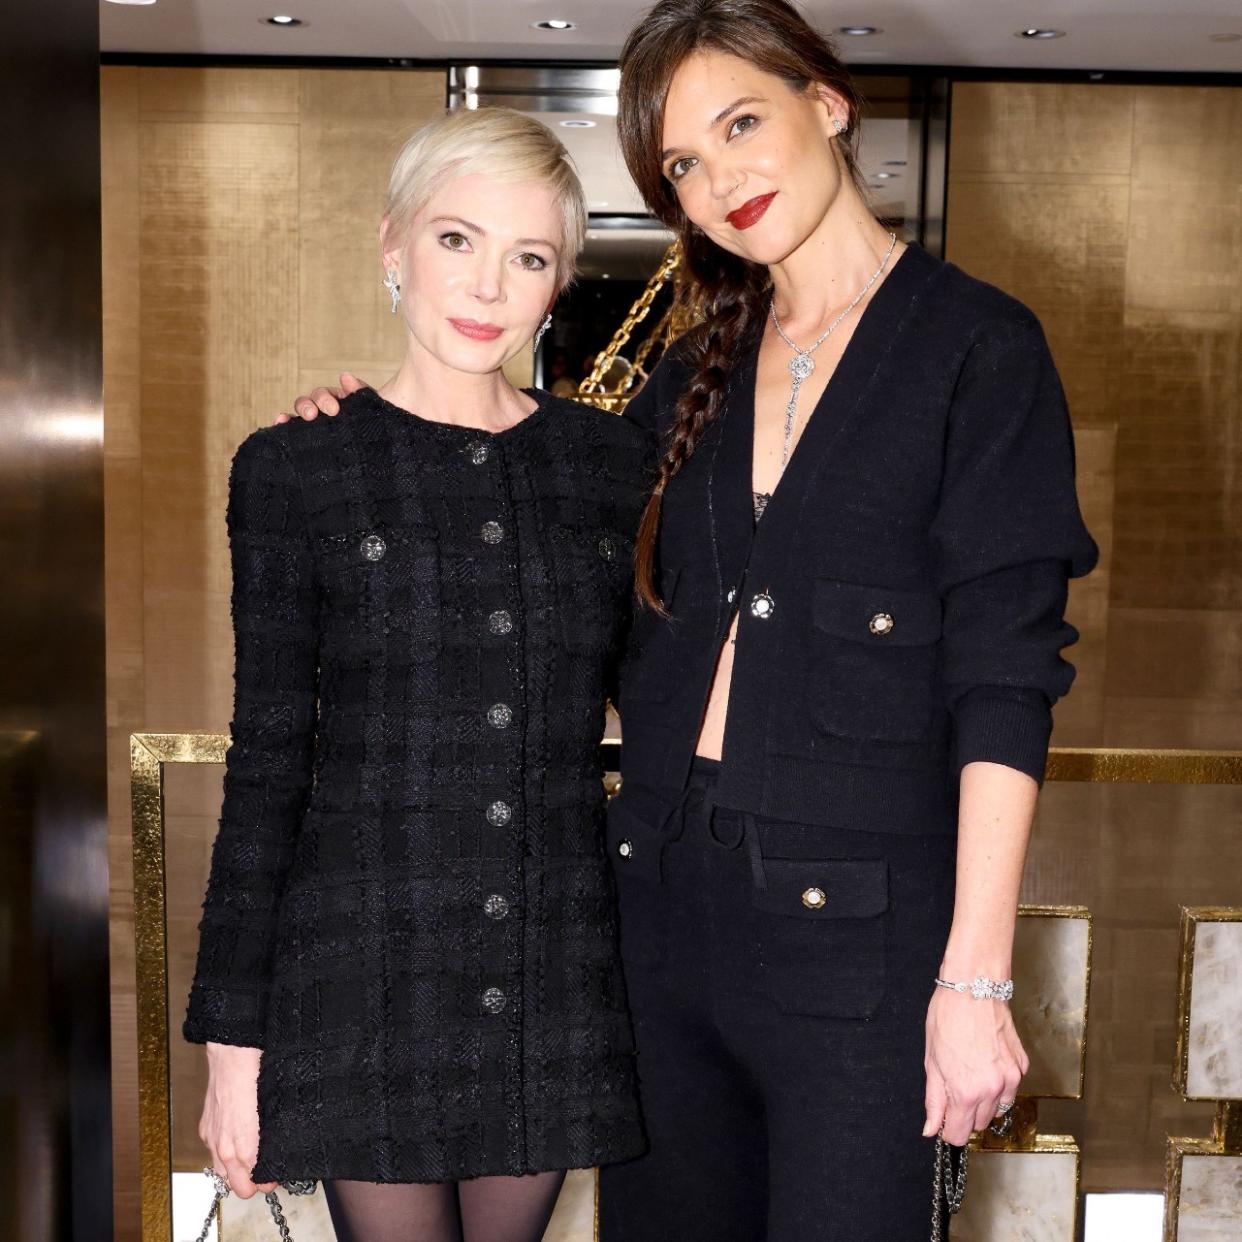  Michelle Williams and Katie Holmes at a Chanel event. 